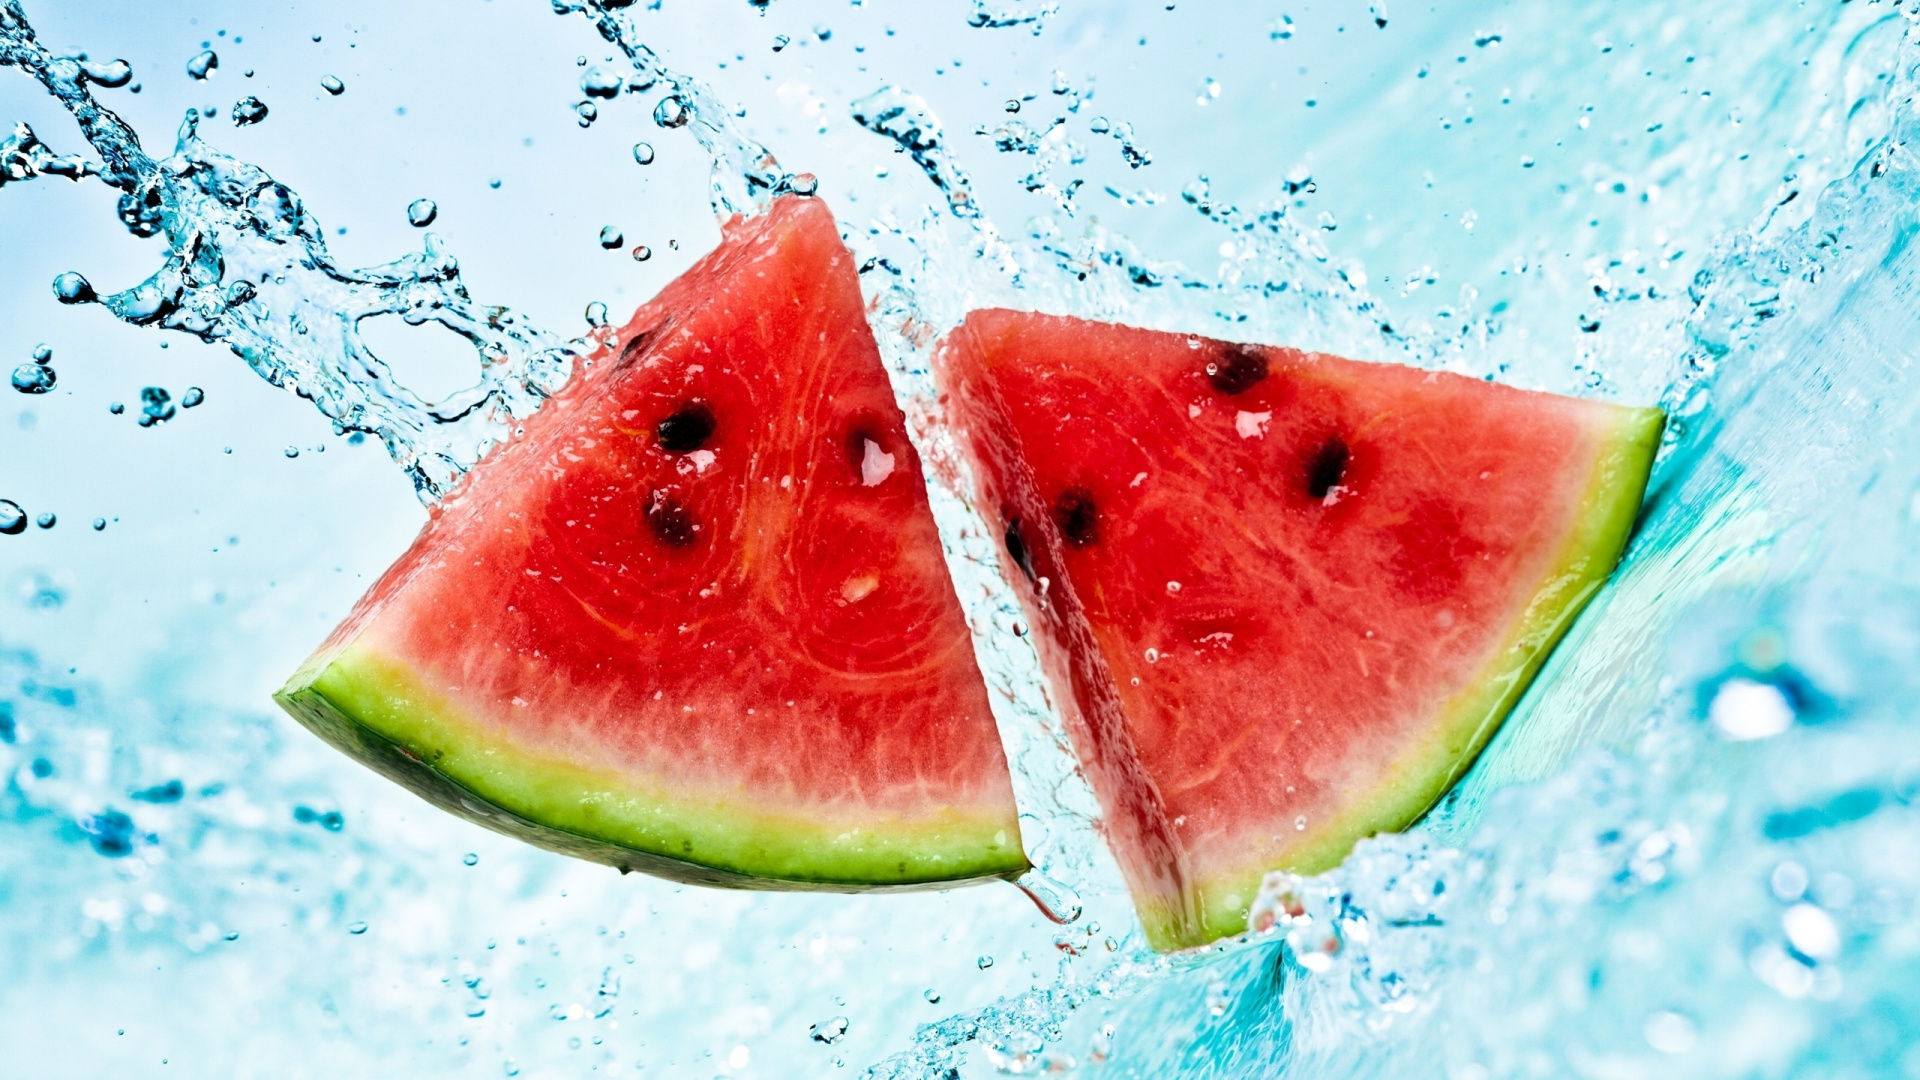 Sliced Watermelon on Water With Water Droplets. Wallpaper in 1920x1080 Resolution